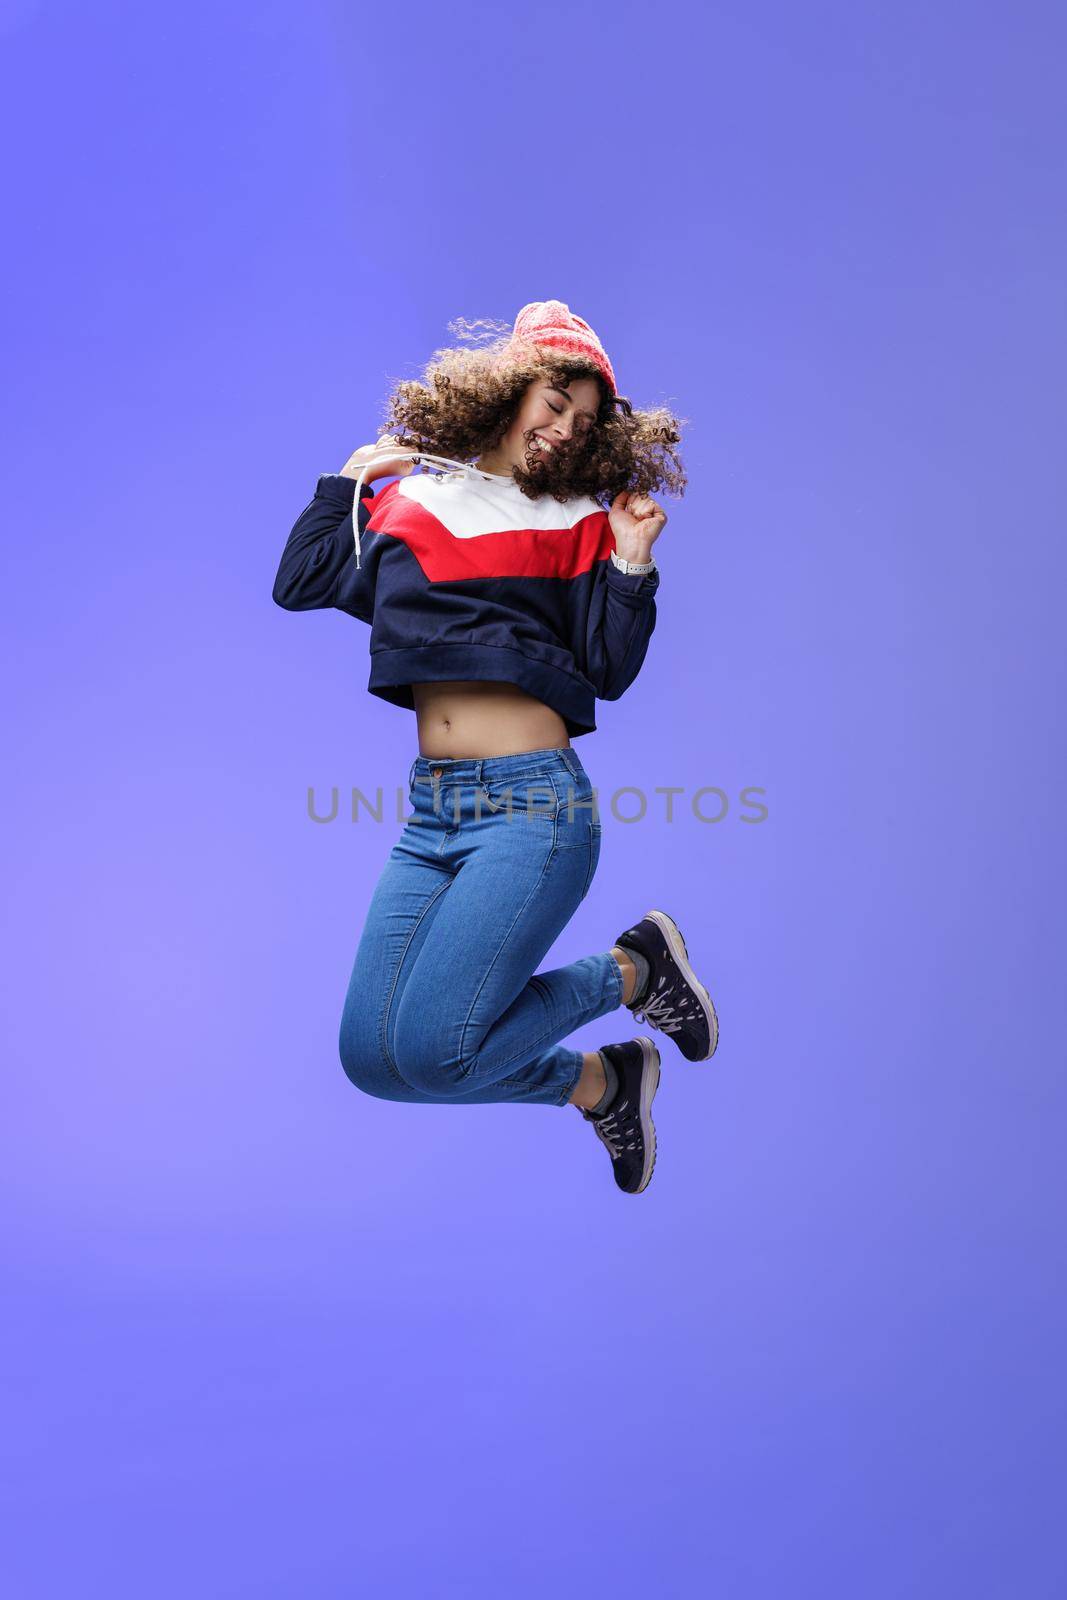 Girl jumping from happiness and delight feeling carefree close eyes and smiling broadly enjoying moment having fun raising hands being dreamy and playful over blue background. Lifestyle, fashion and positive emotions concept